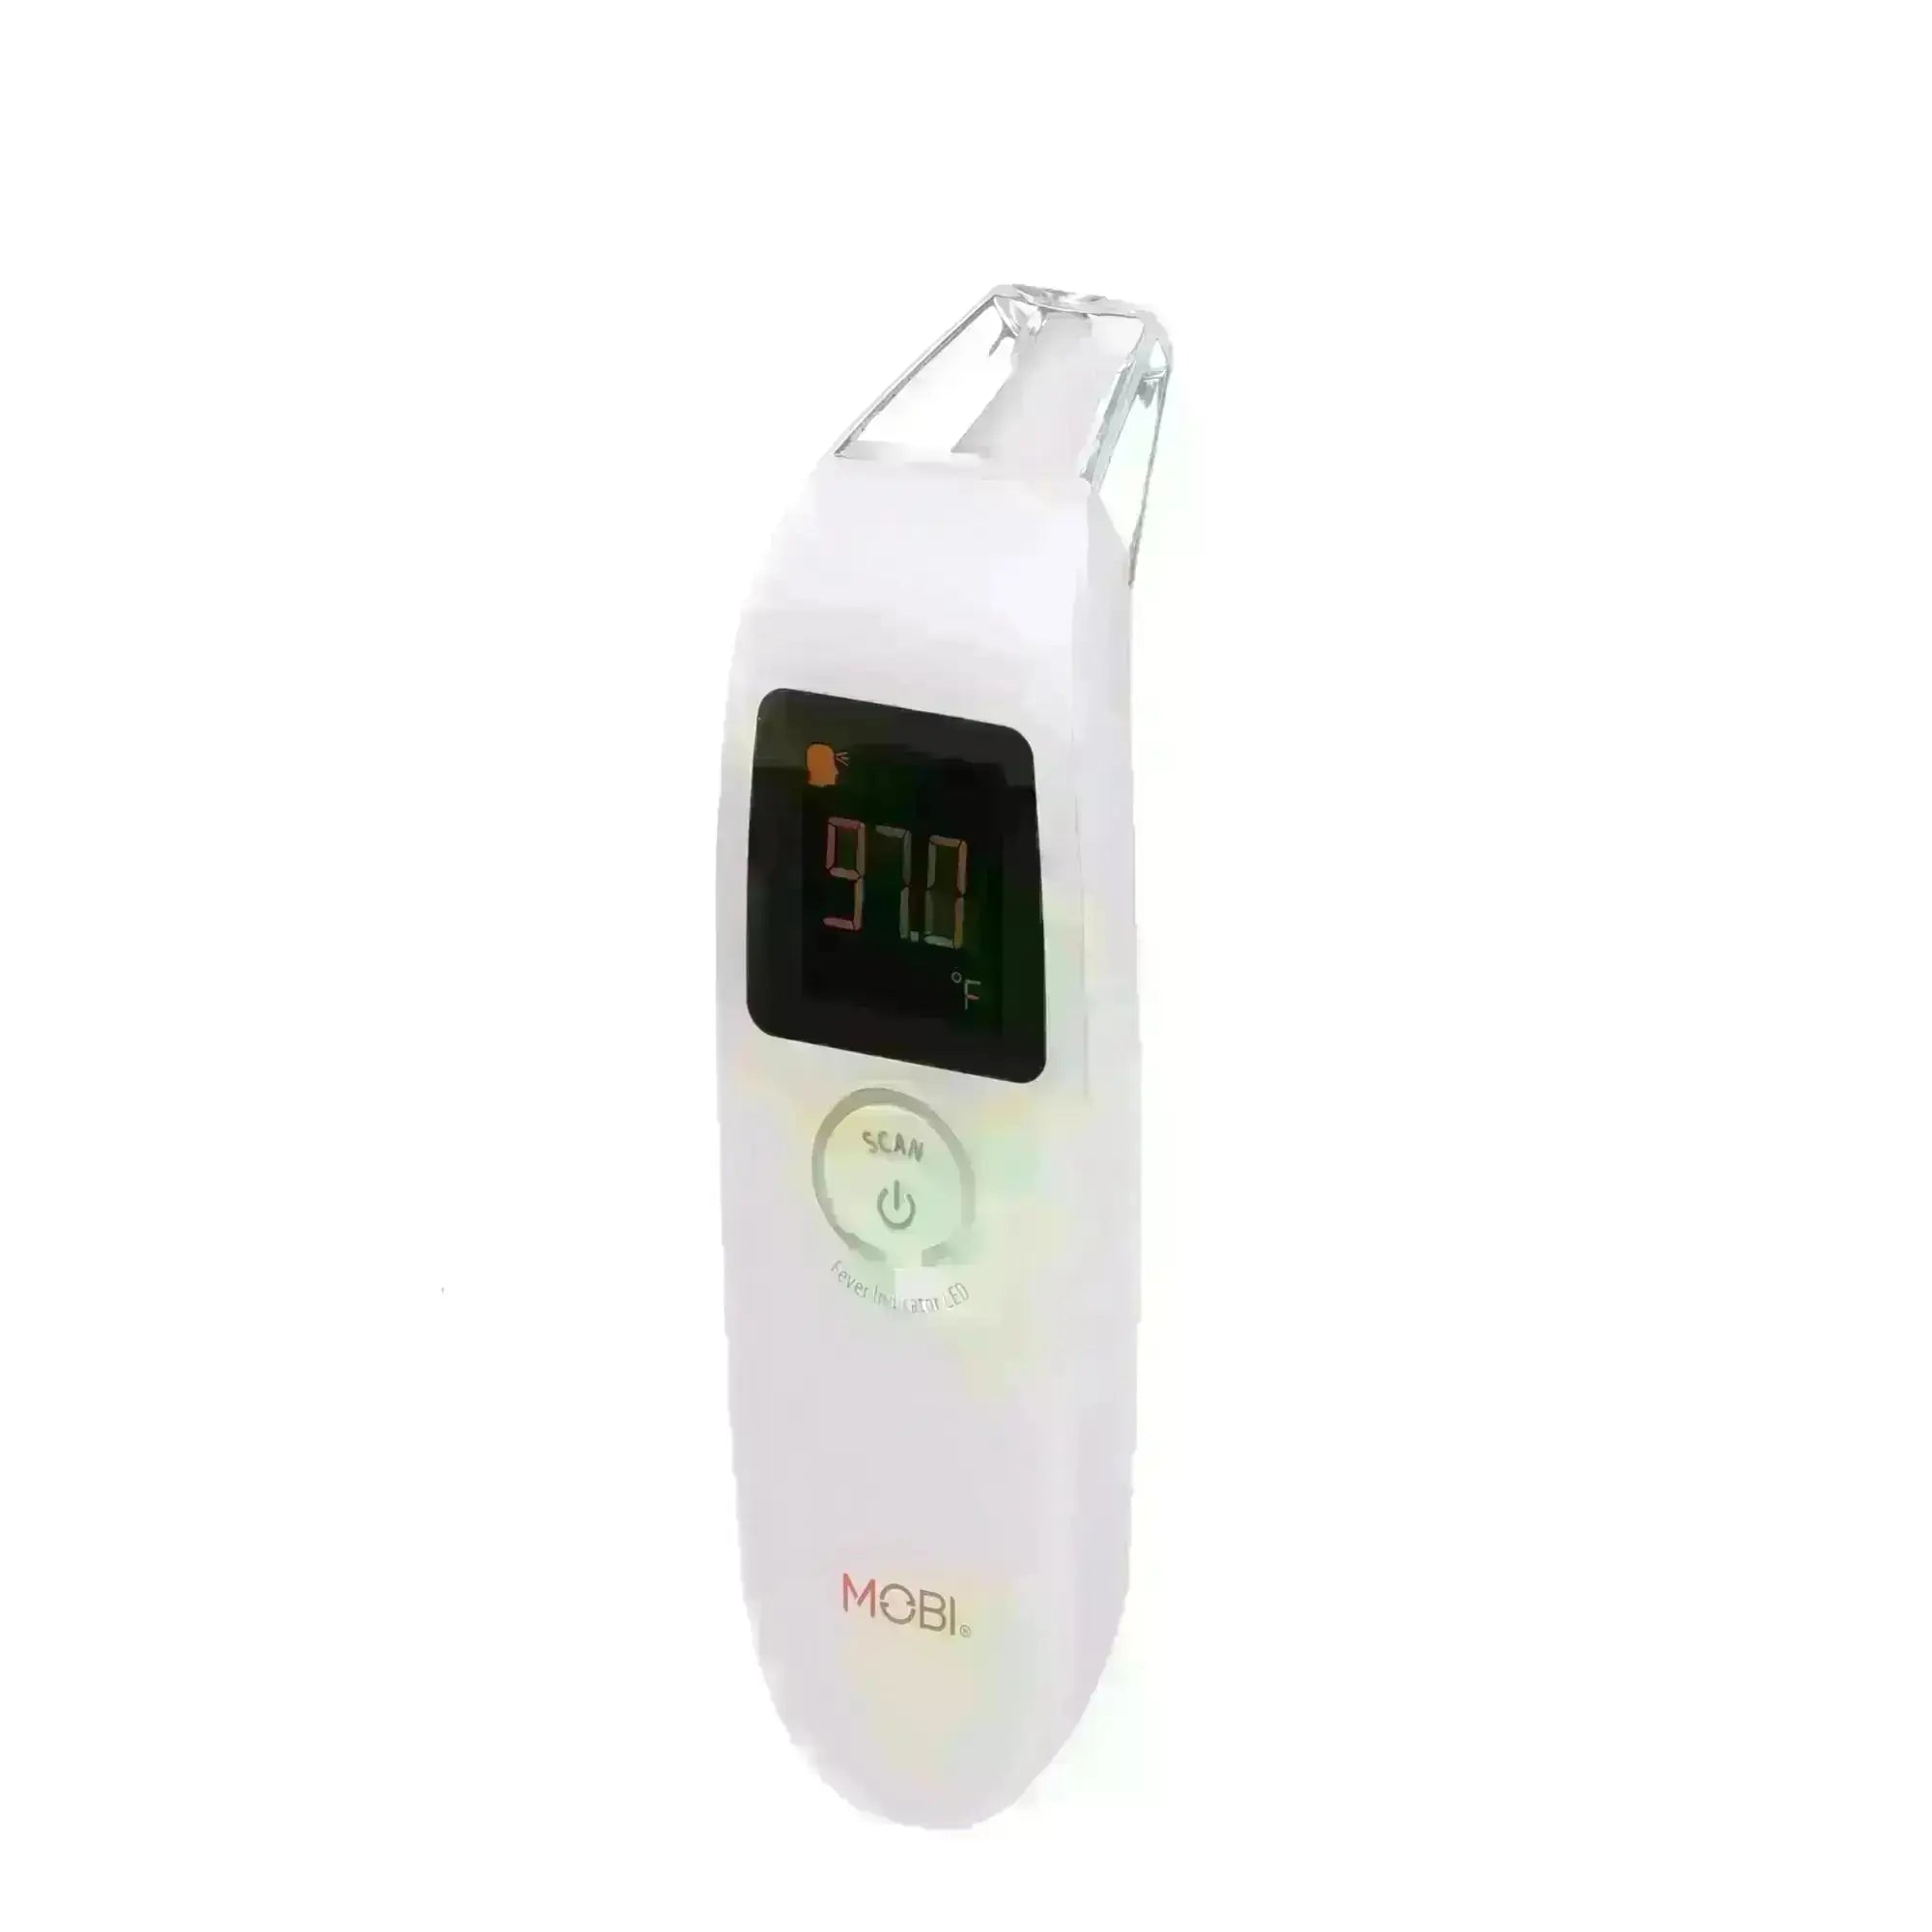 DualScan Health Check Ear & Forehead Thermometer with Medication Reminder Alarm - MOBI USA